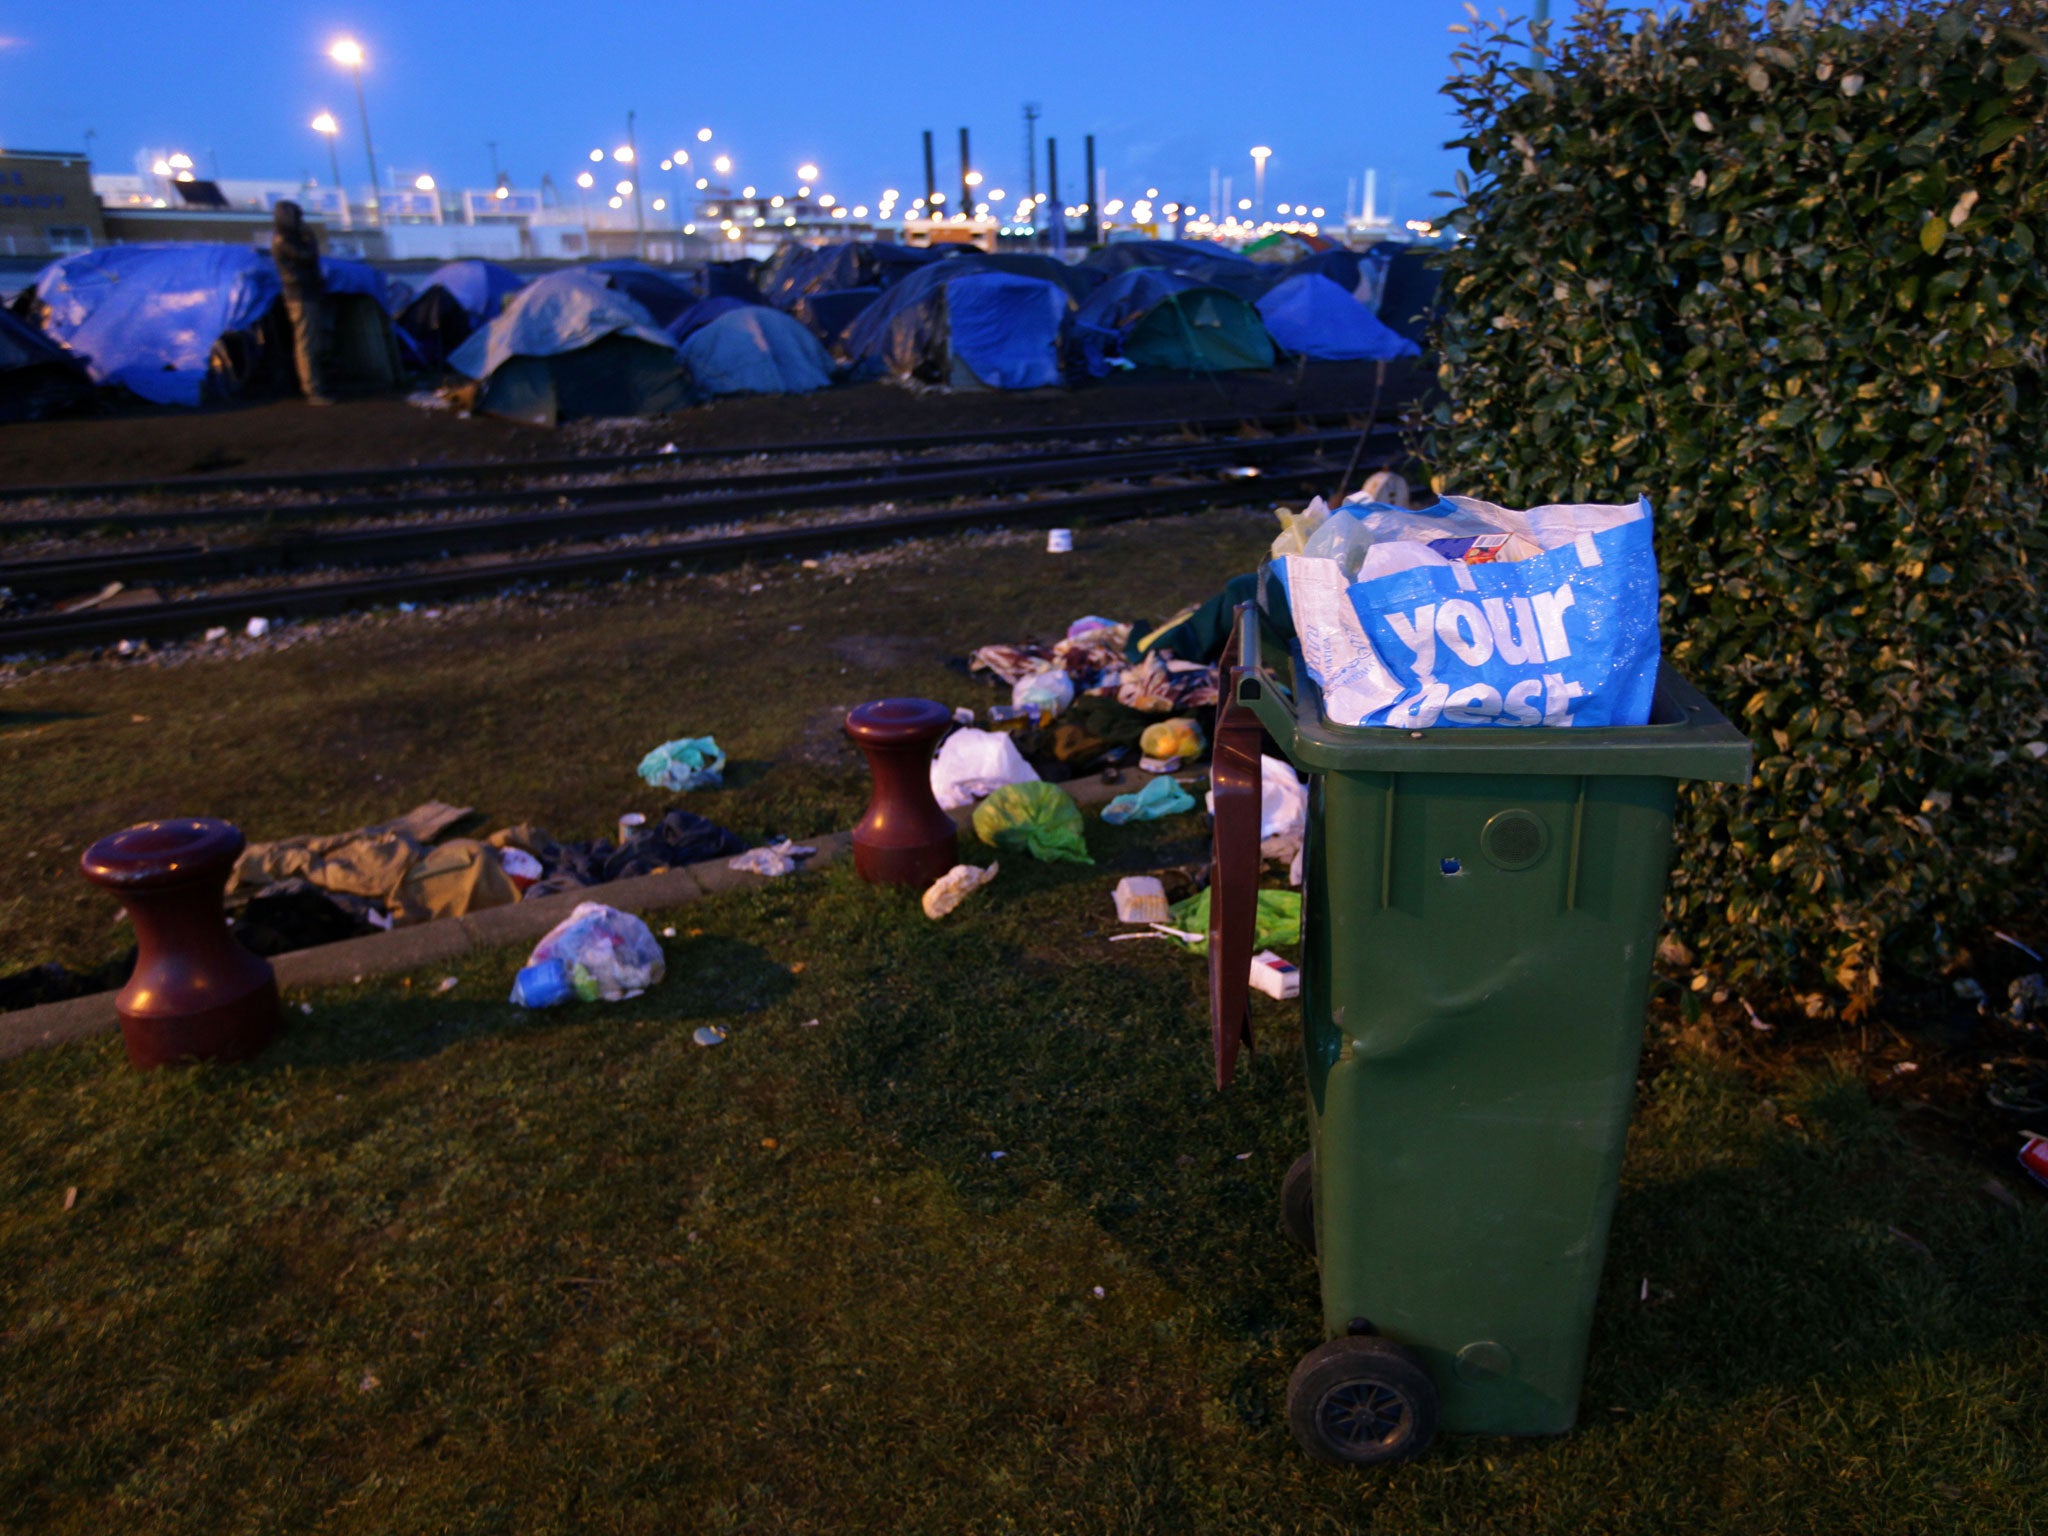 Rubbish strewn on the ground near one of the campsites (Justin Sutcliffe)